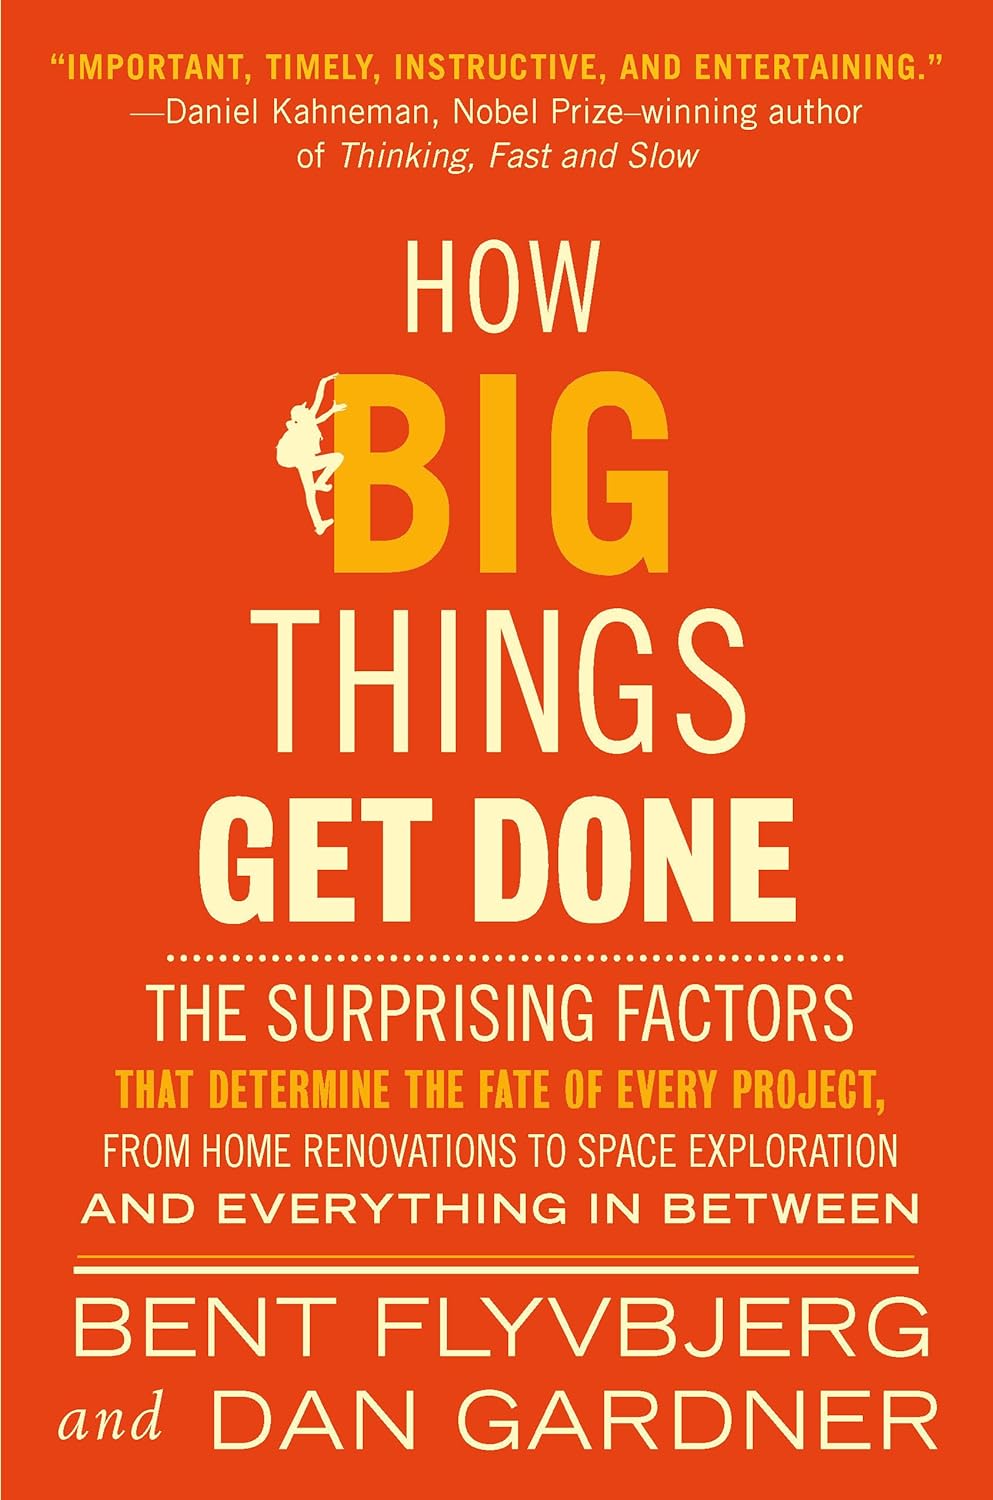 https://www.amazon.com/How-Big-Things-Get-Done/dp/0593239512